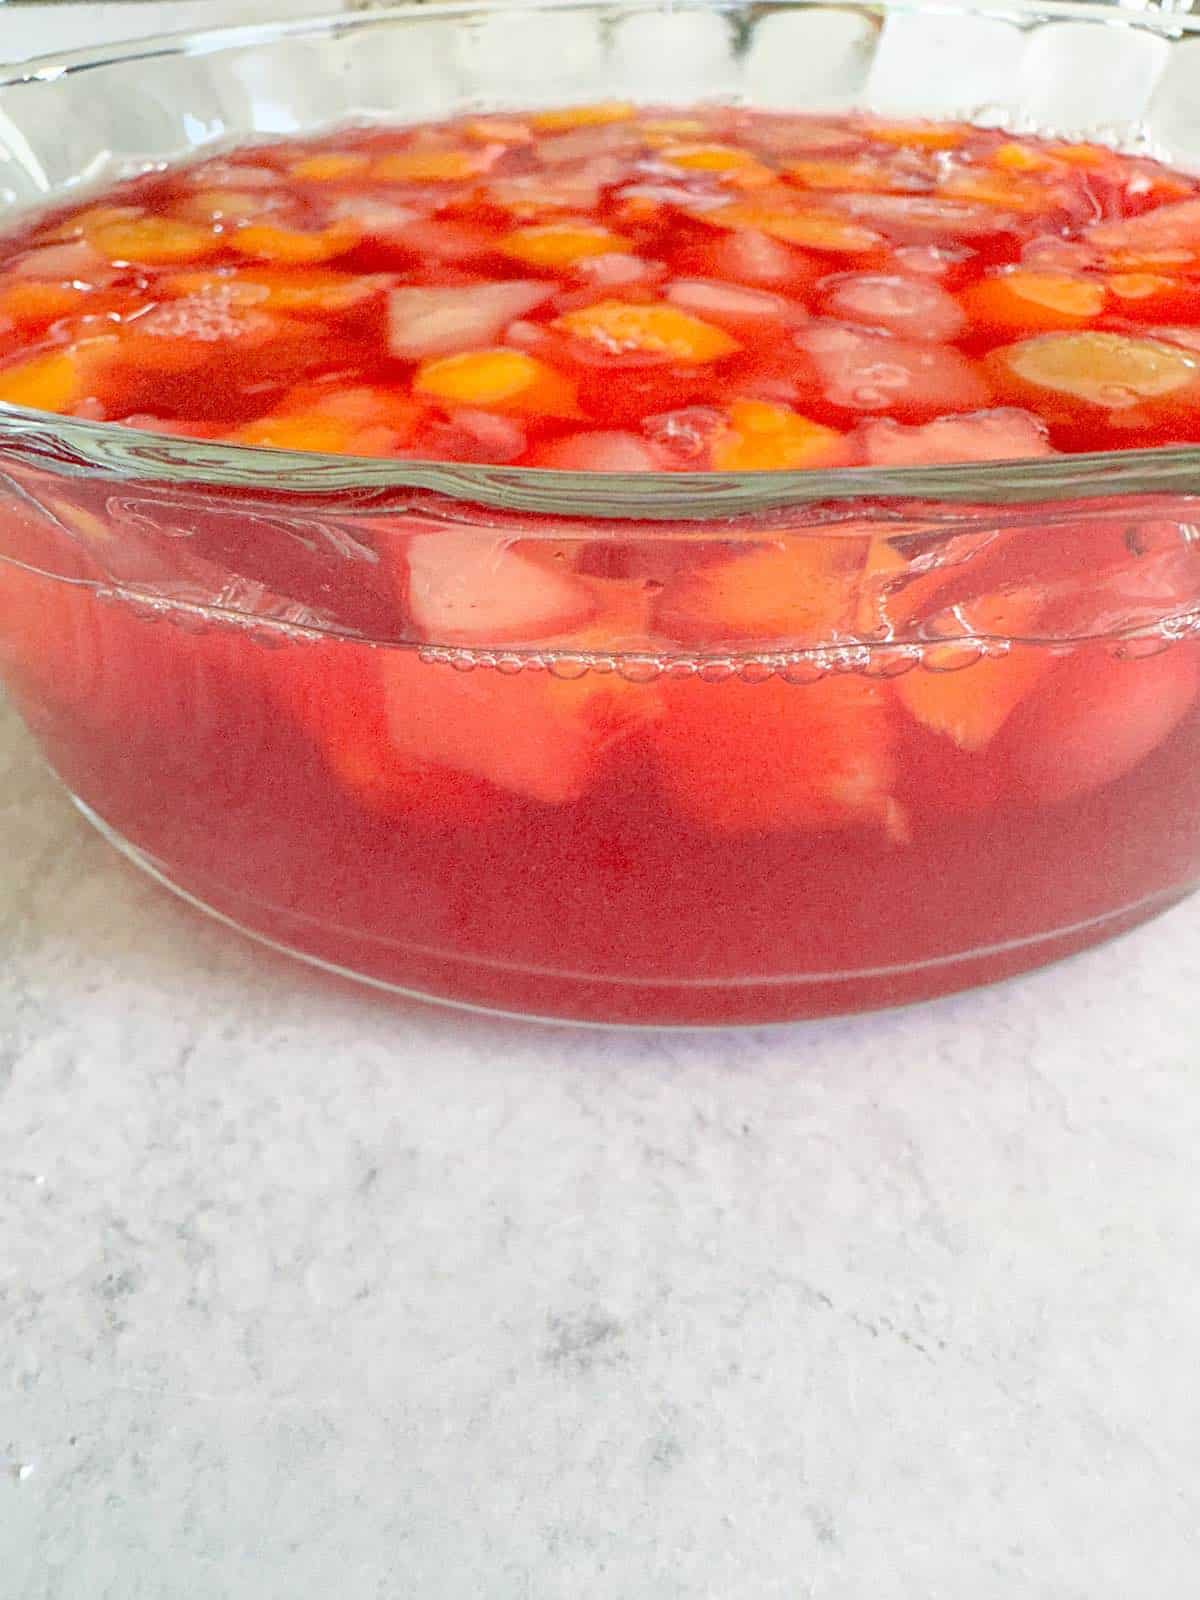 Fruit cocktail in jello in a glass bowl.